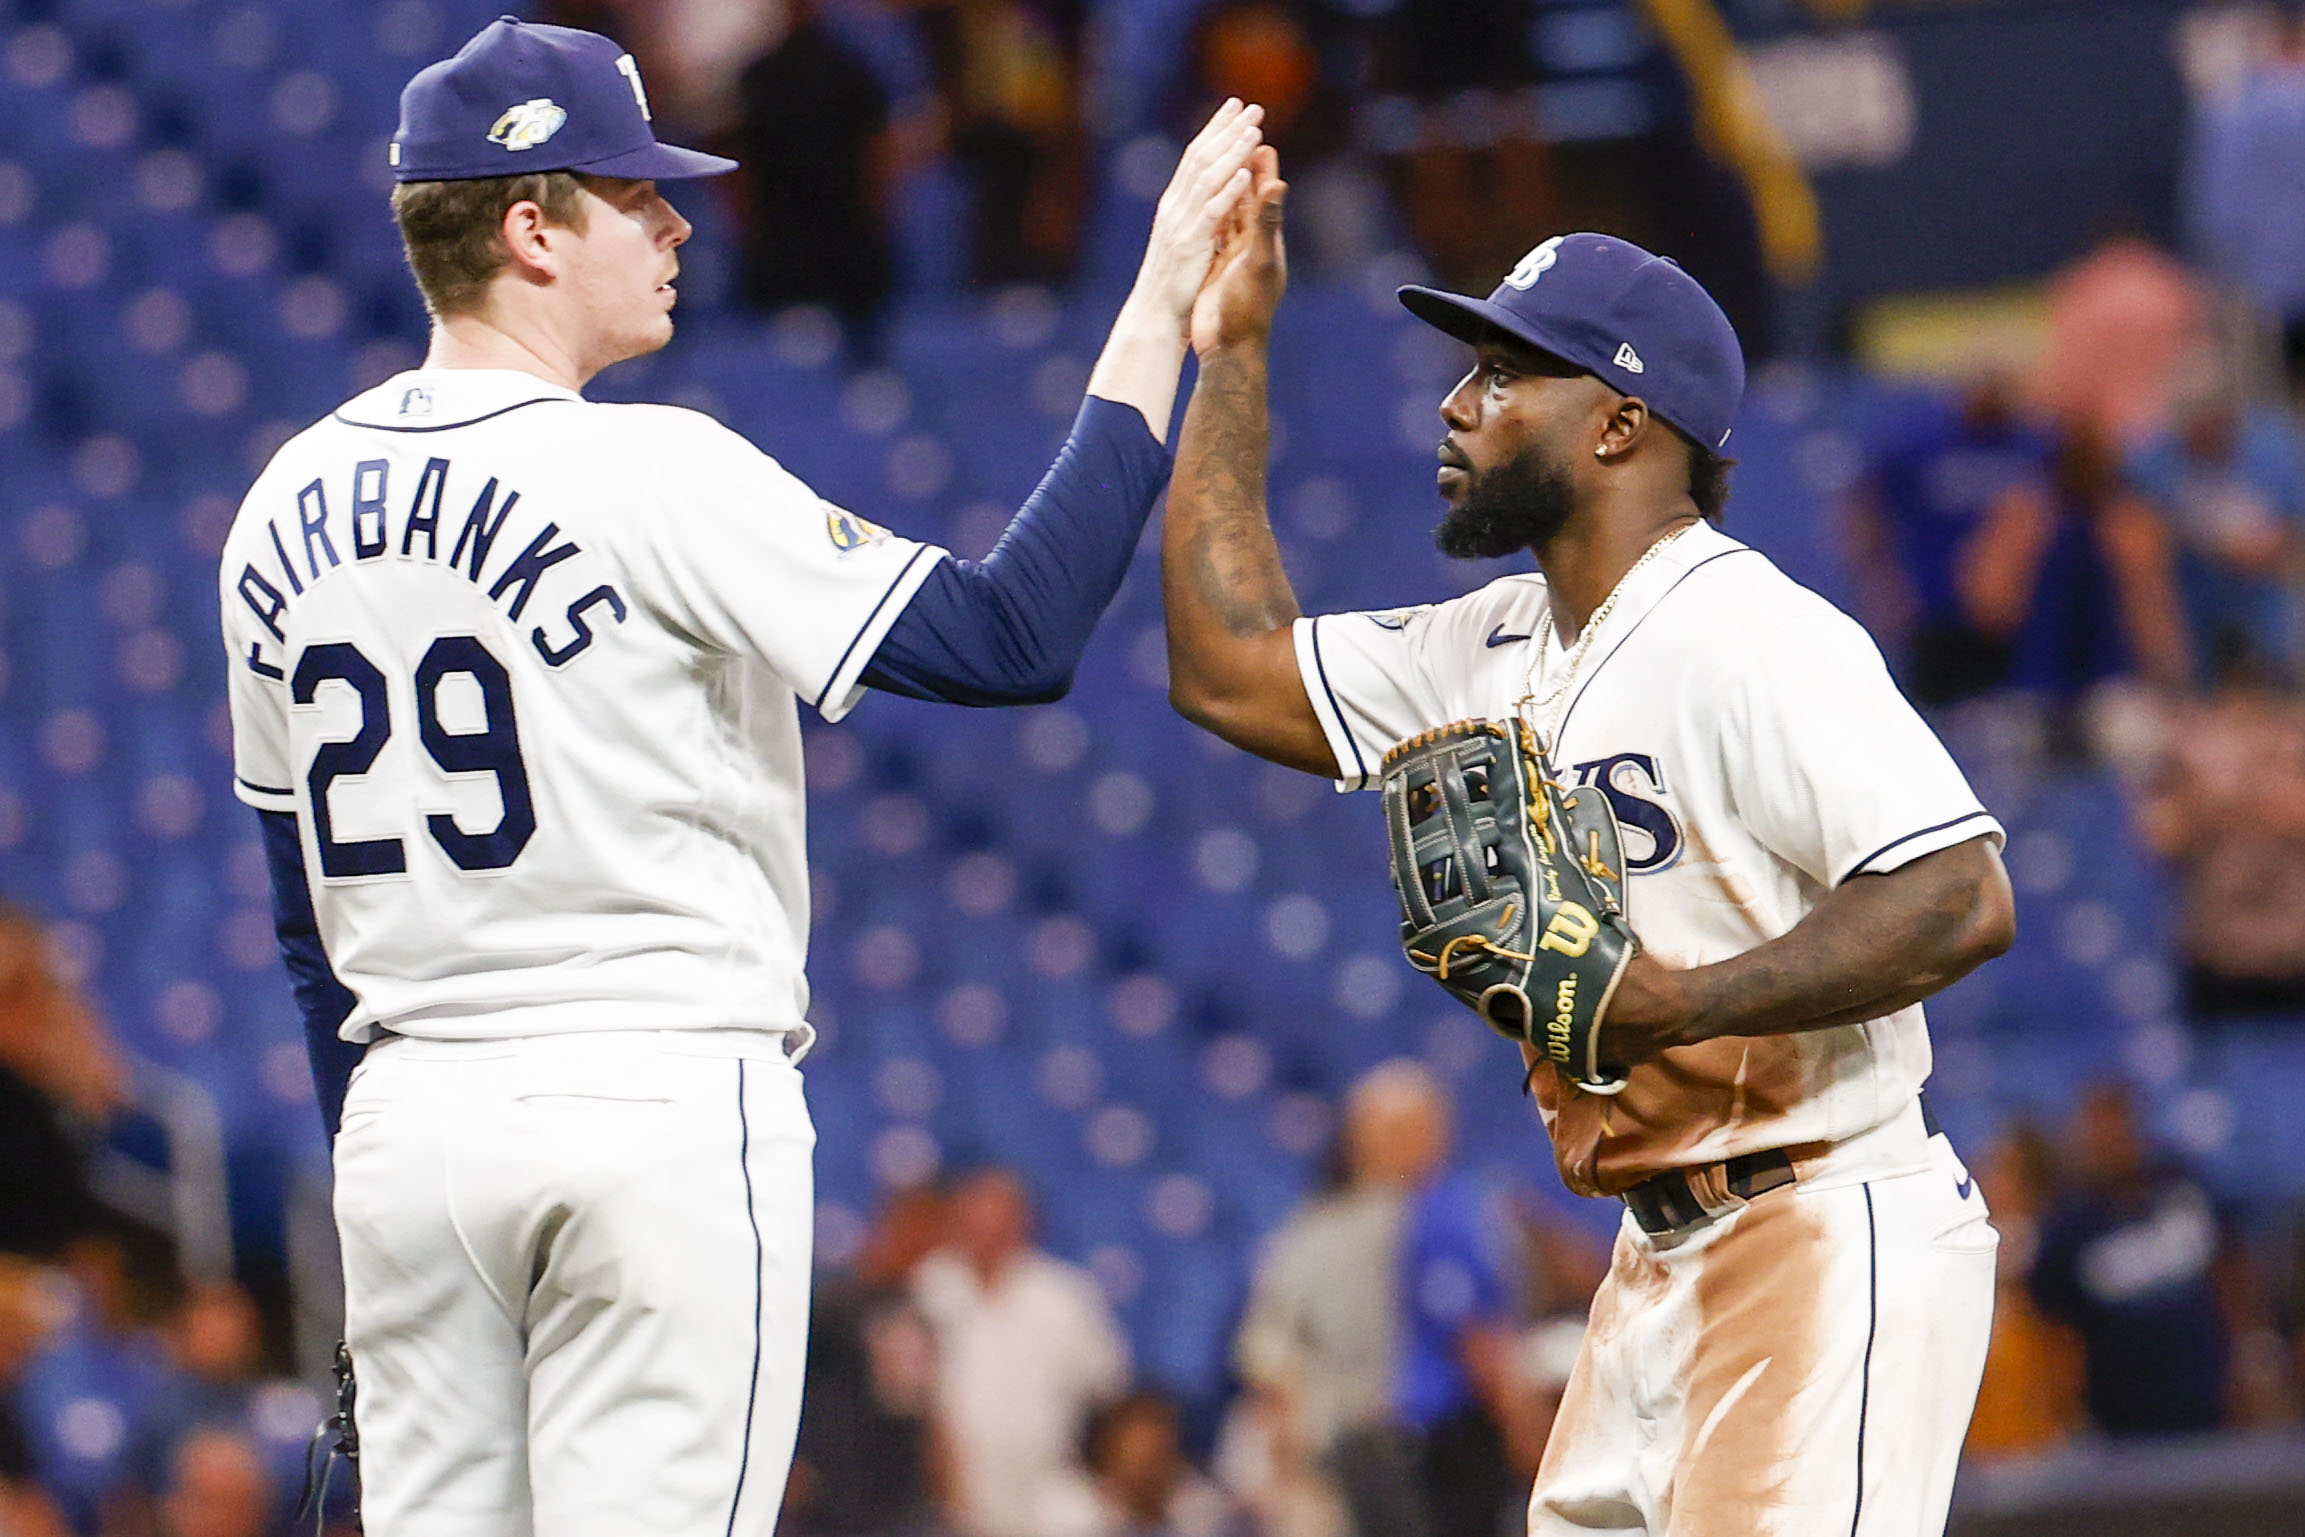 Randy Arozarena delivers for fans as Rays hold off Blue Jays